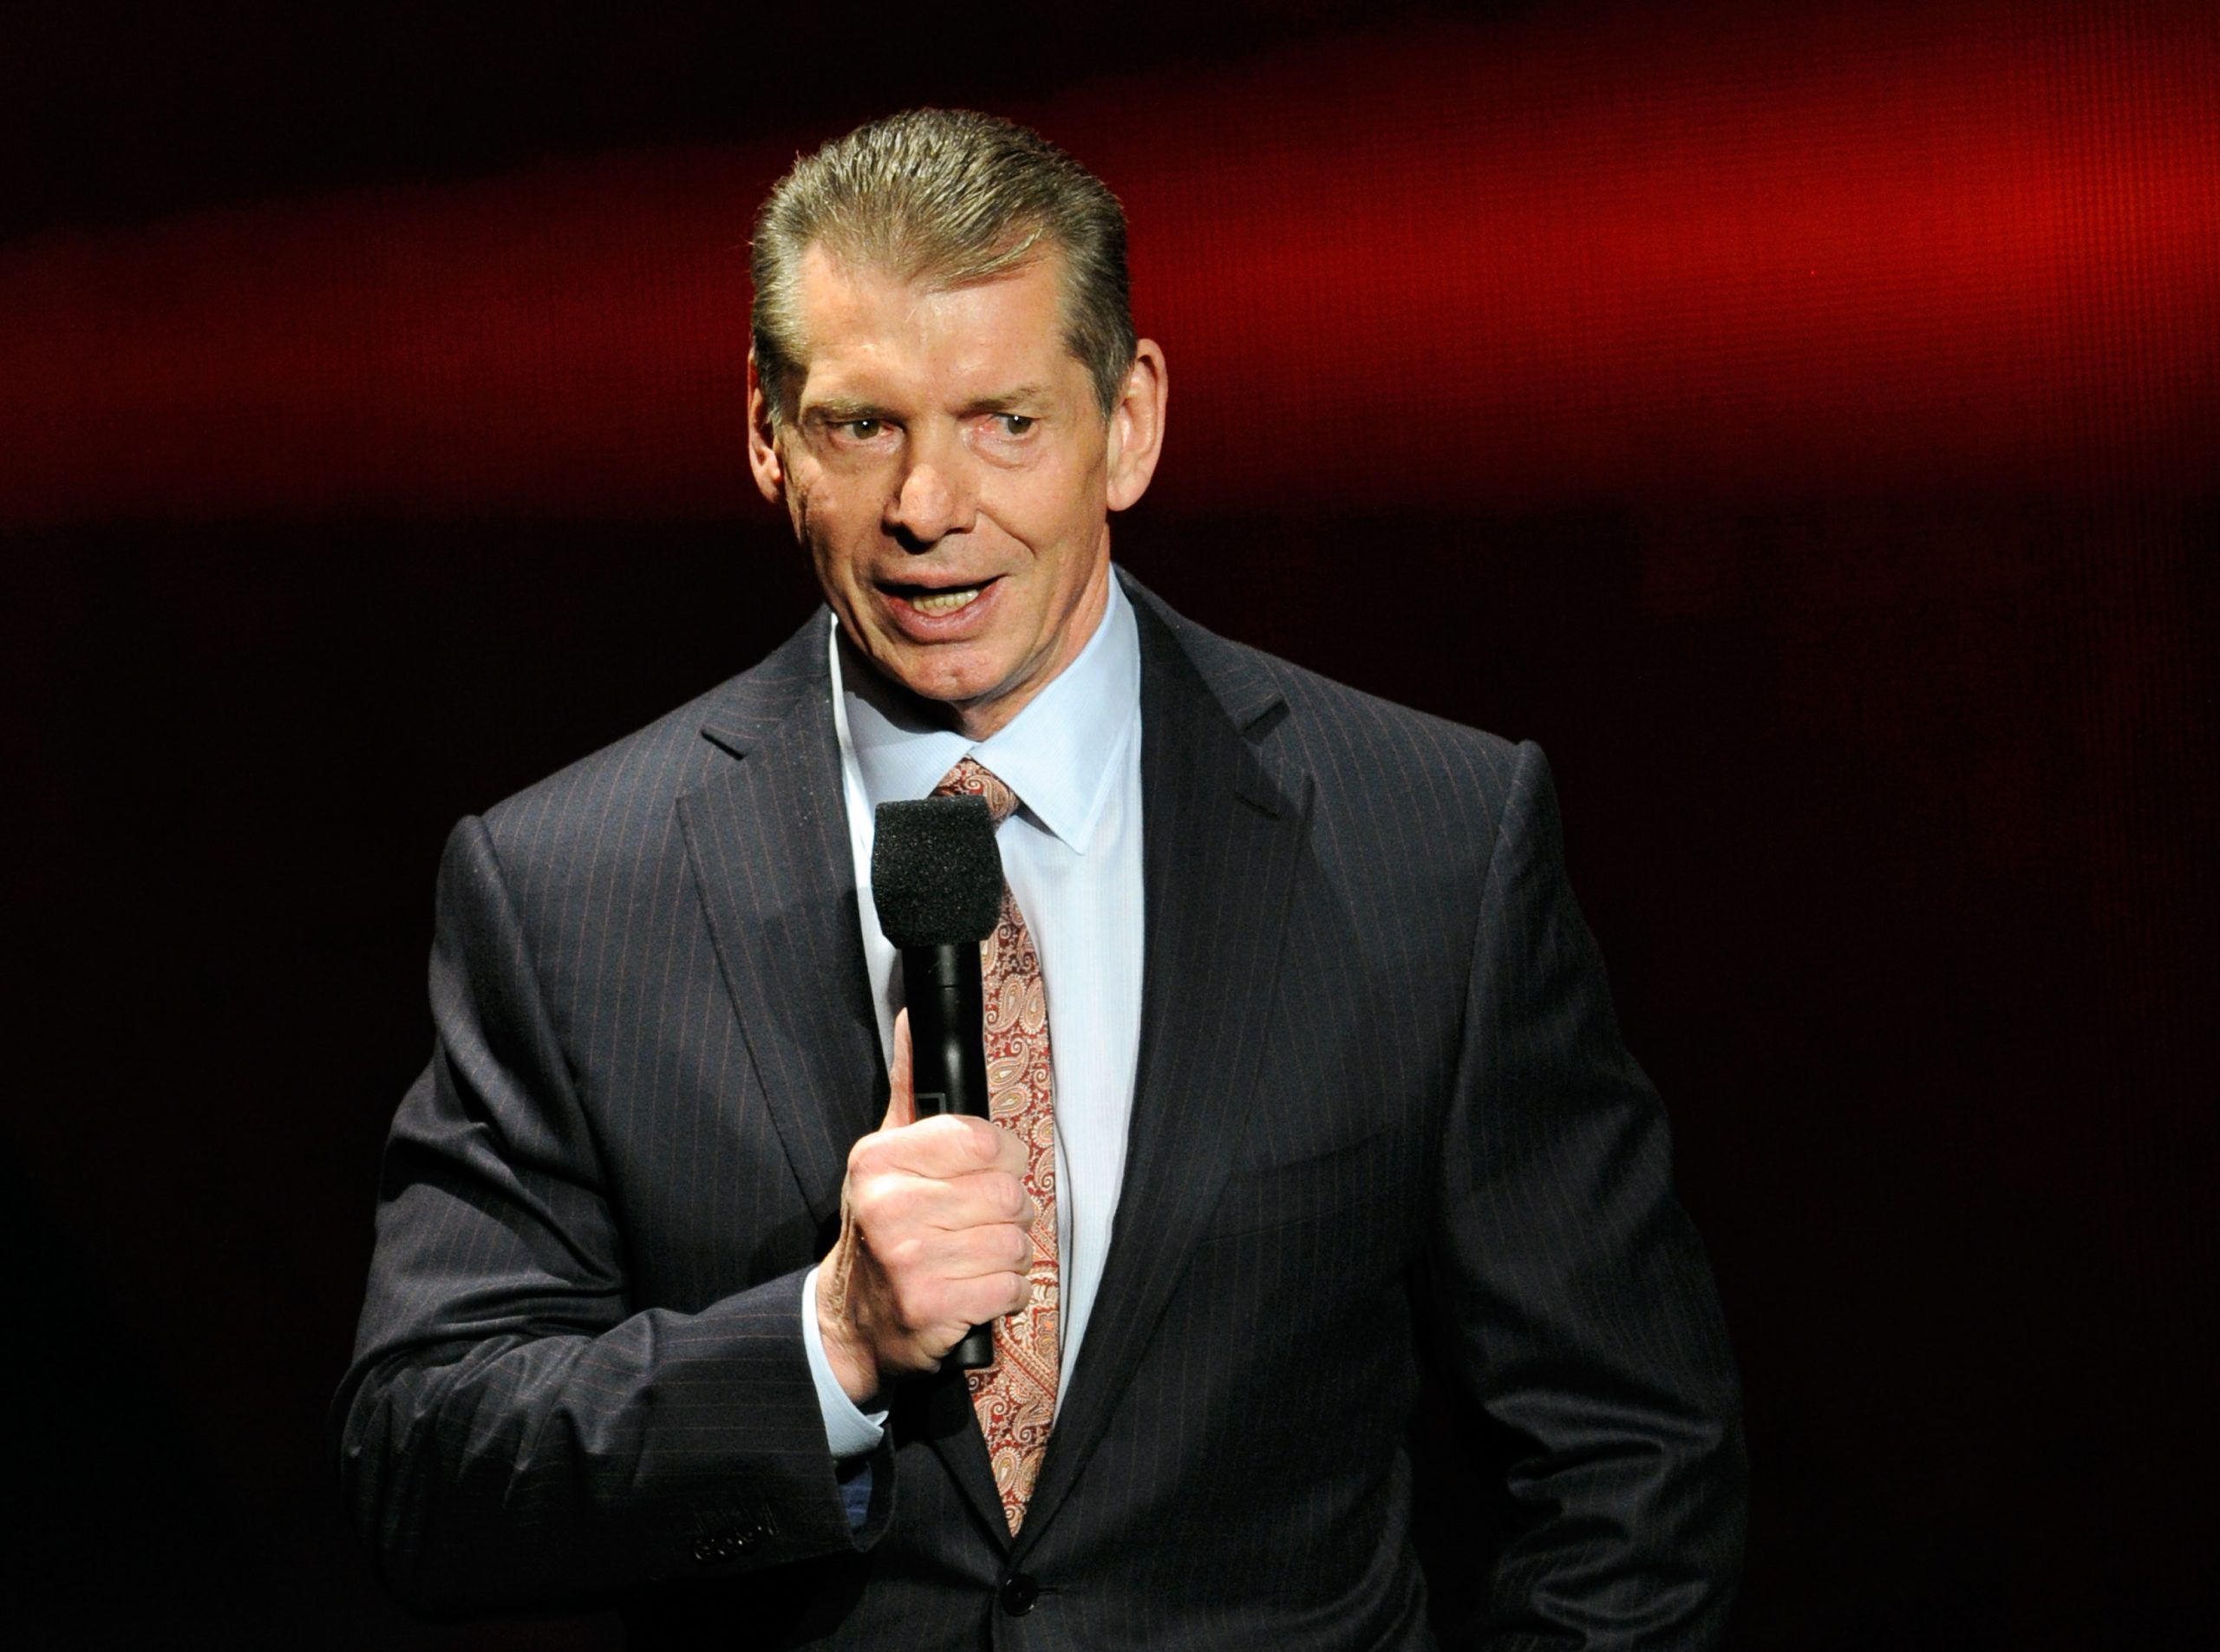 Bob Costas Explains Why Vince McMahon Wanted to Beat Him Up